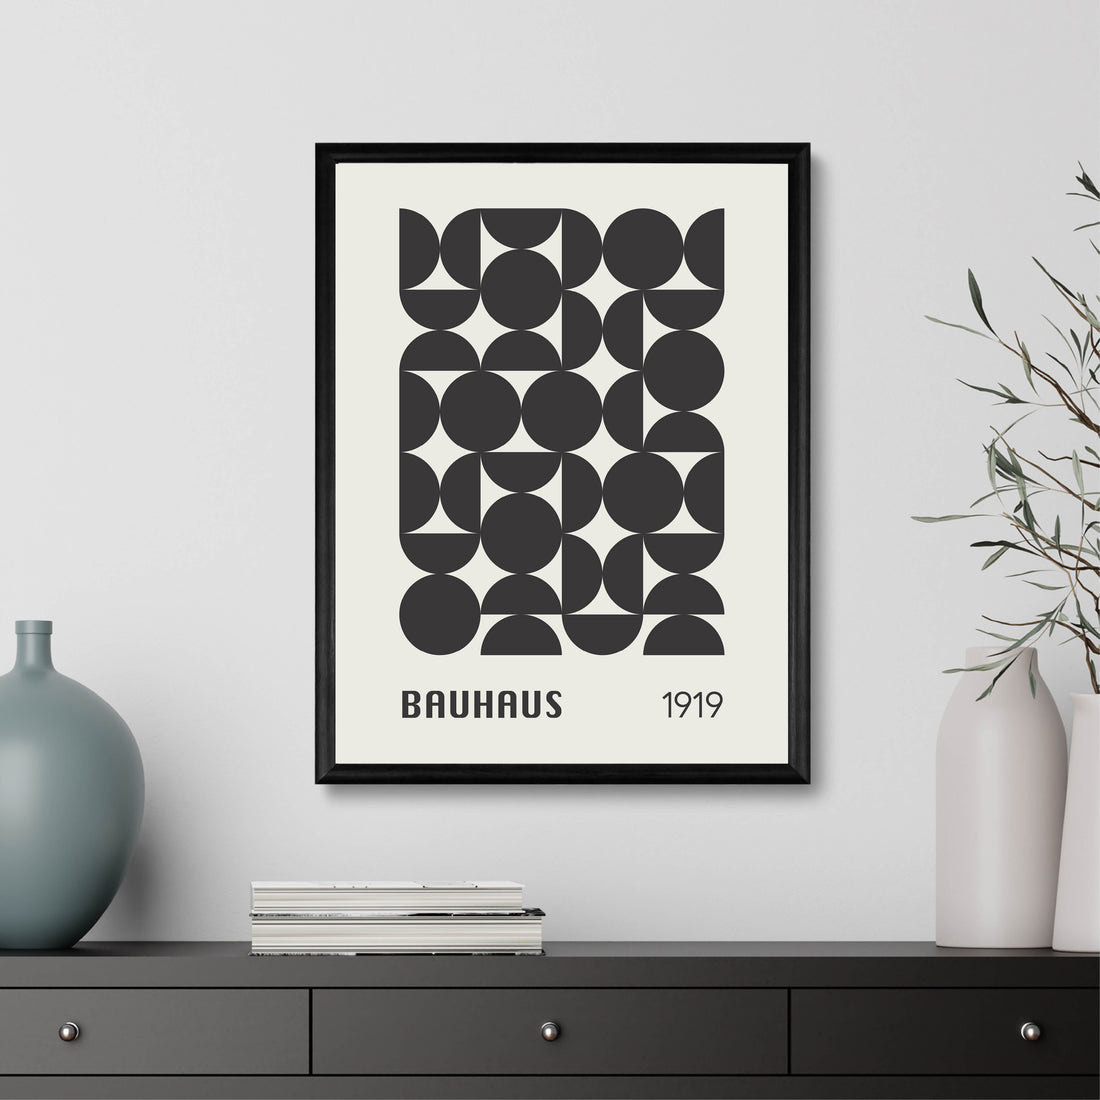 Bauhaus Poster 1919 Circles - Add sophistication to your home